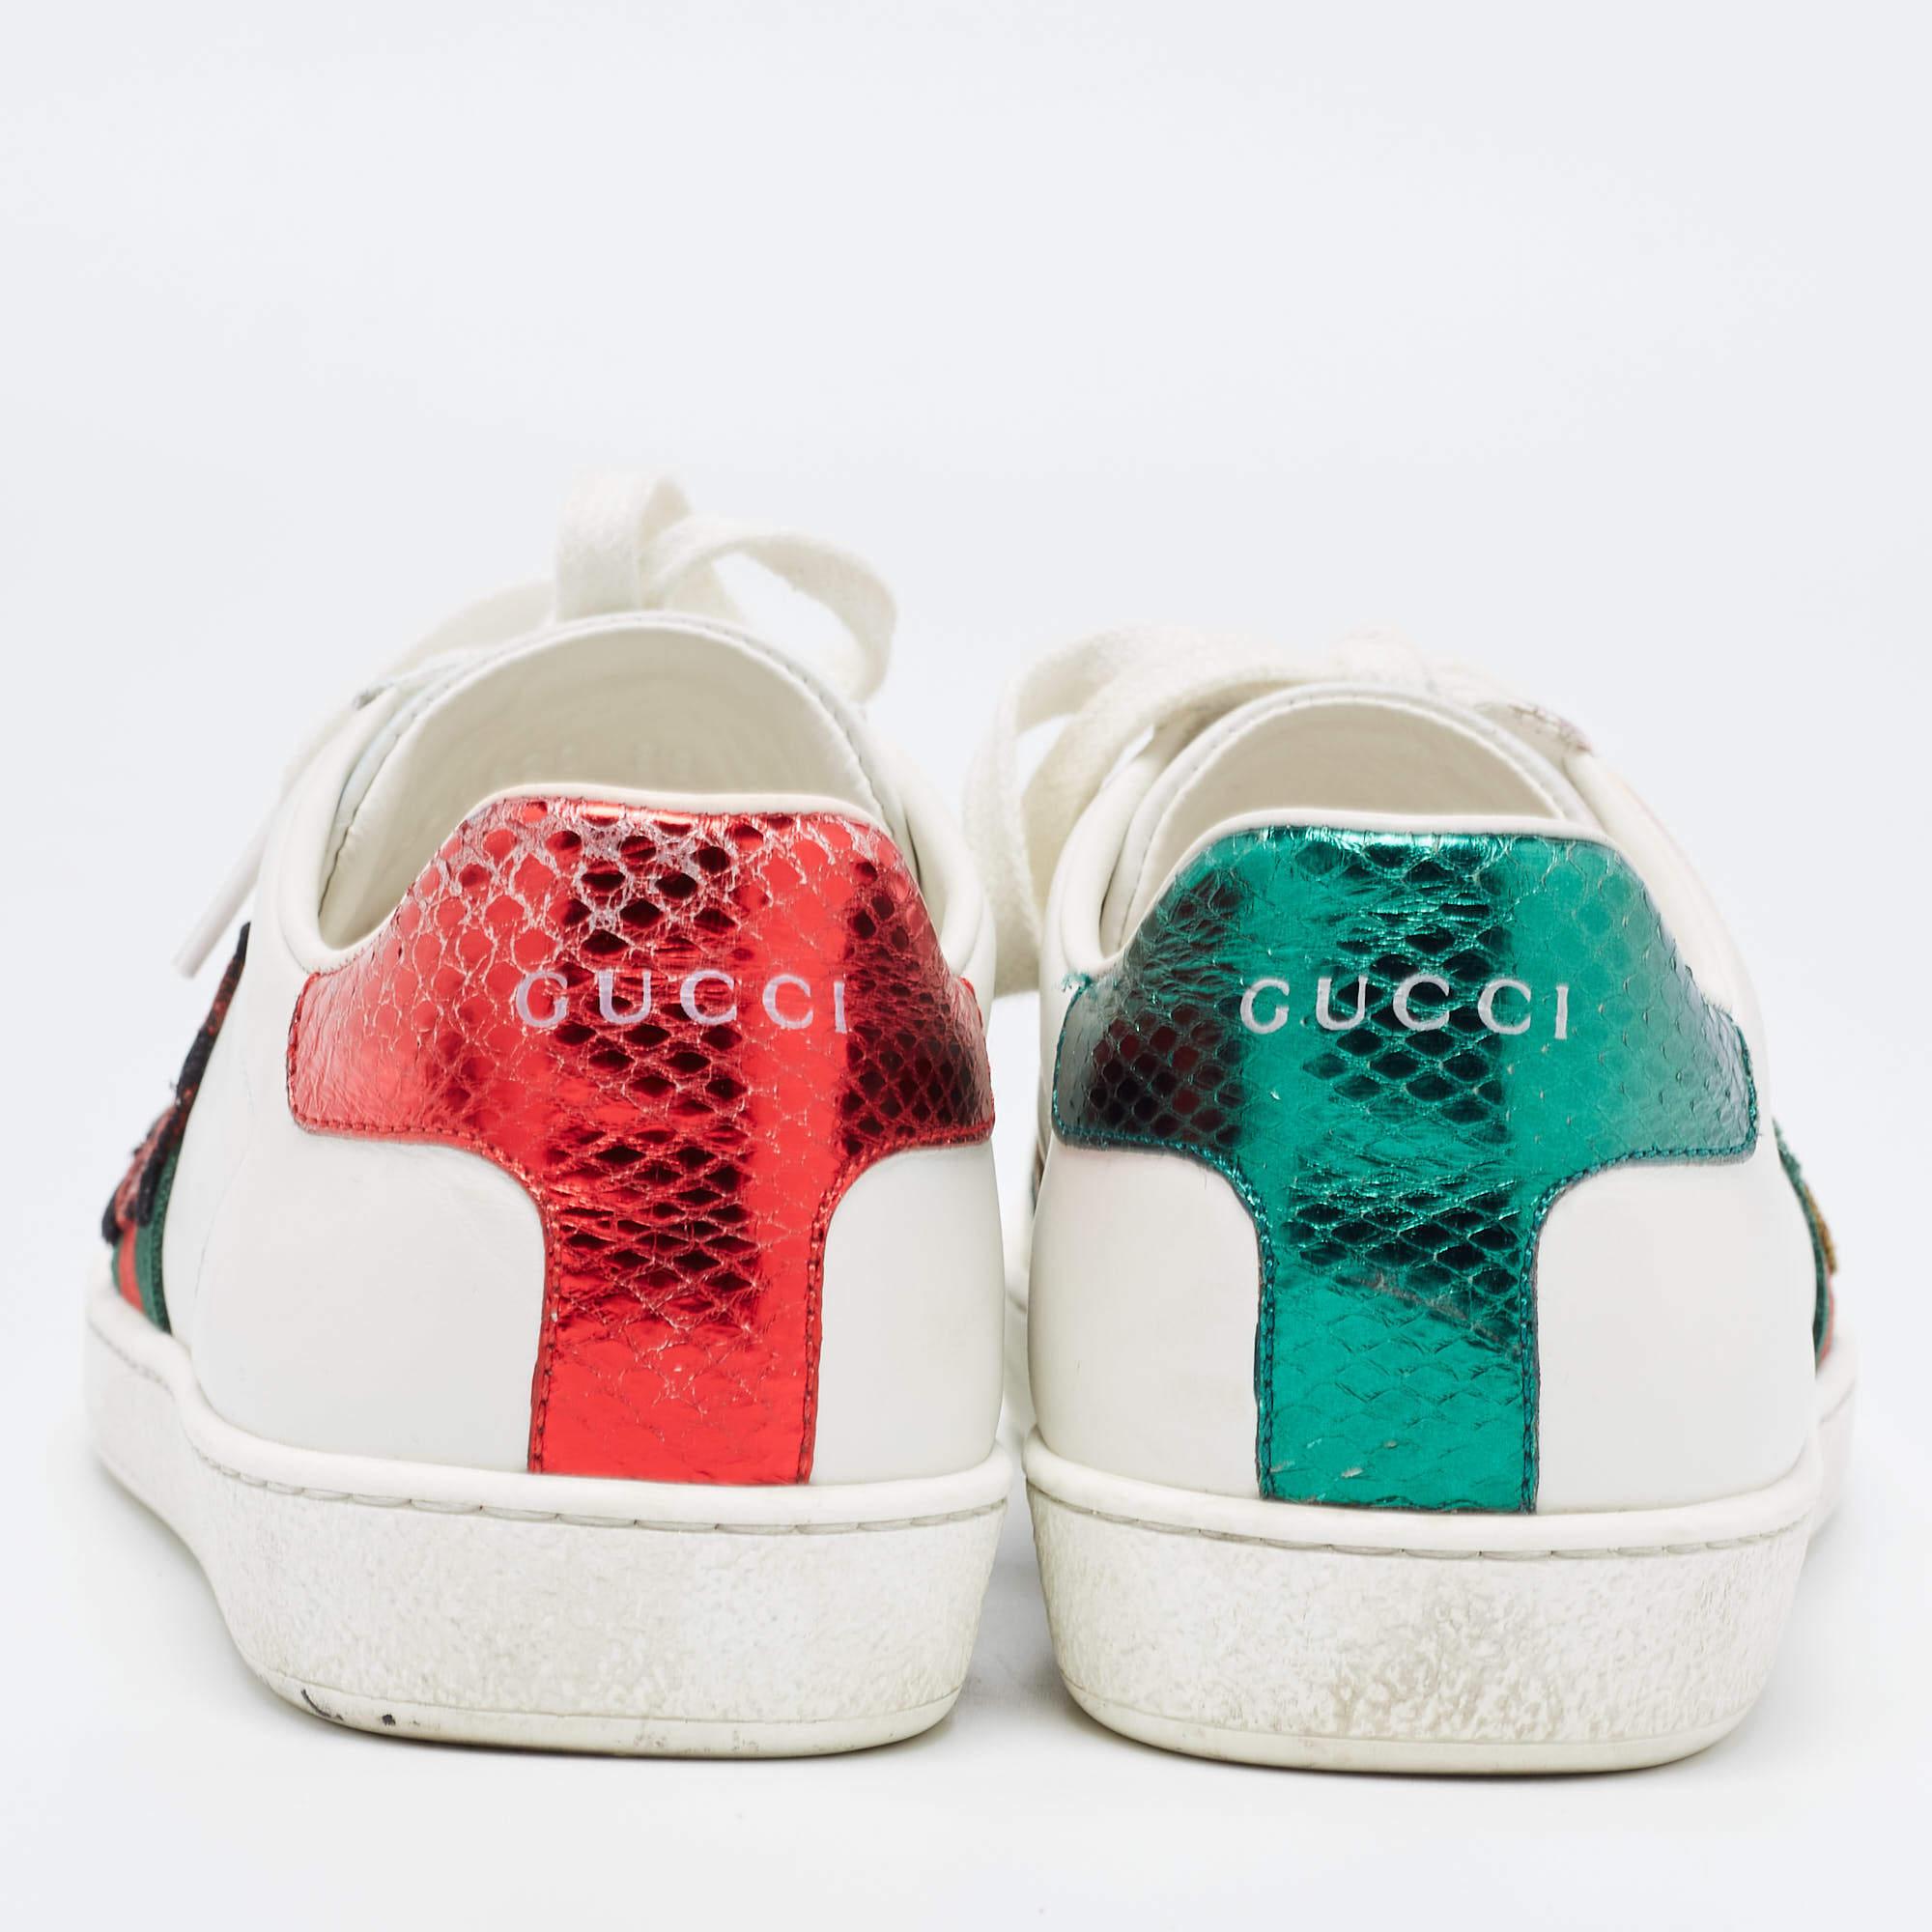 Gucci White/Red Leather and Snake Embossed Leather Ace Pineapple Sneakers Size 3 2